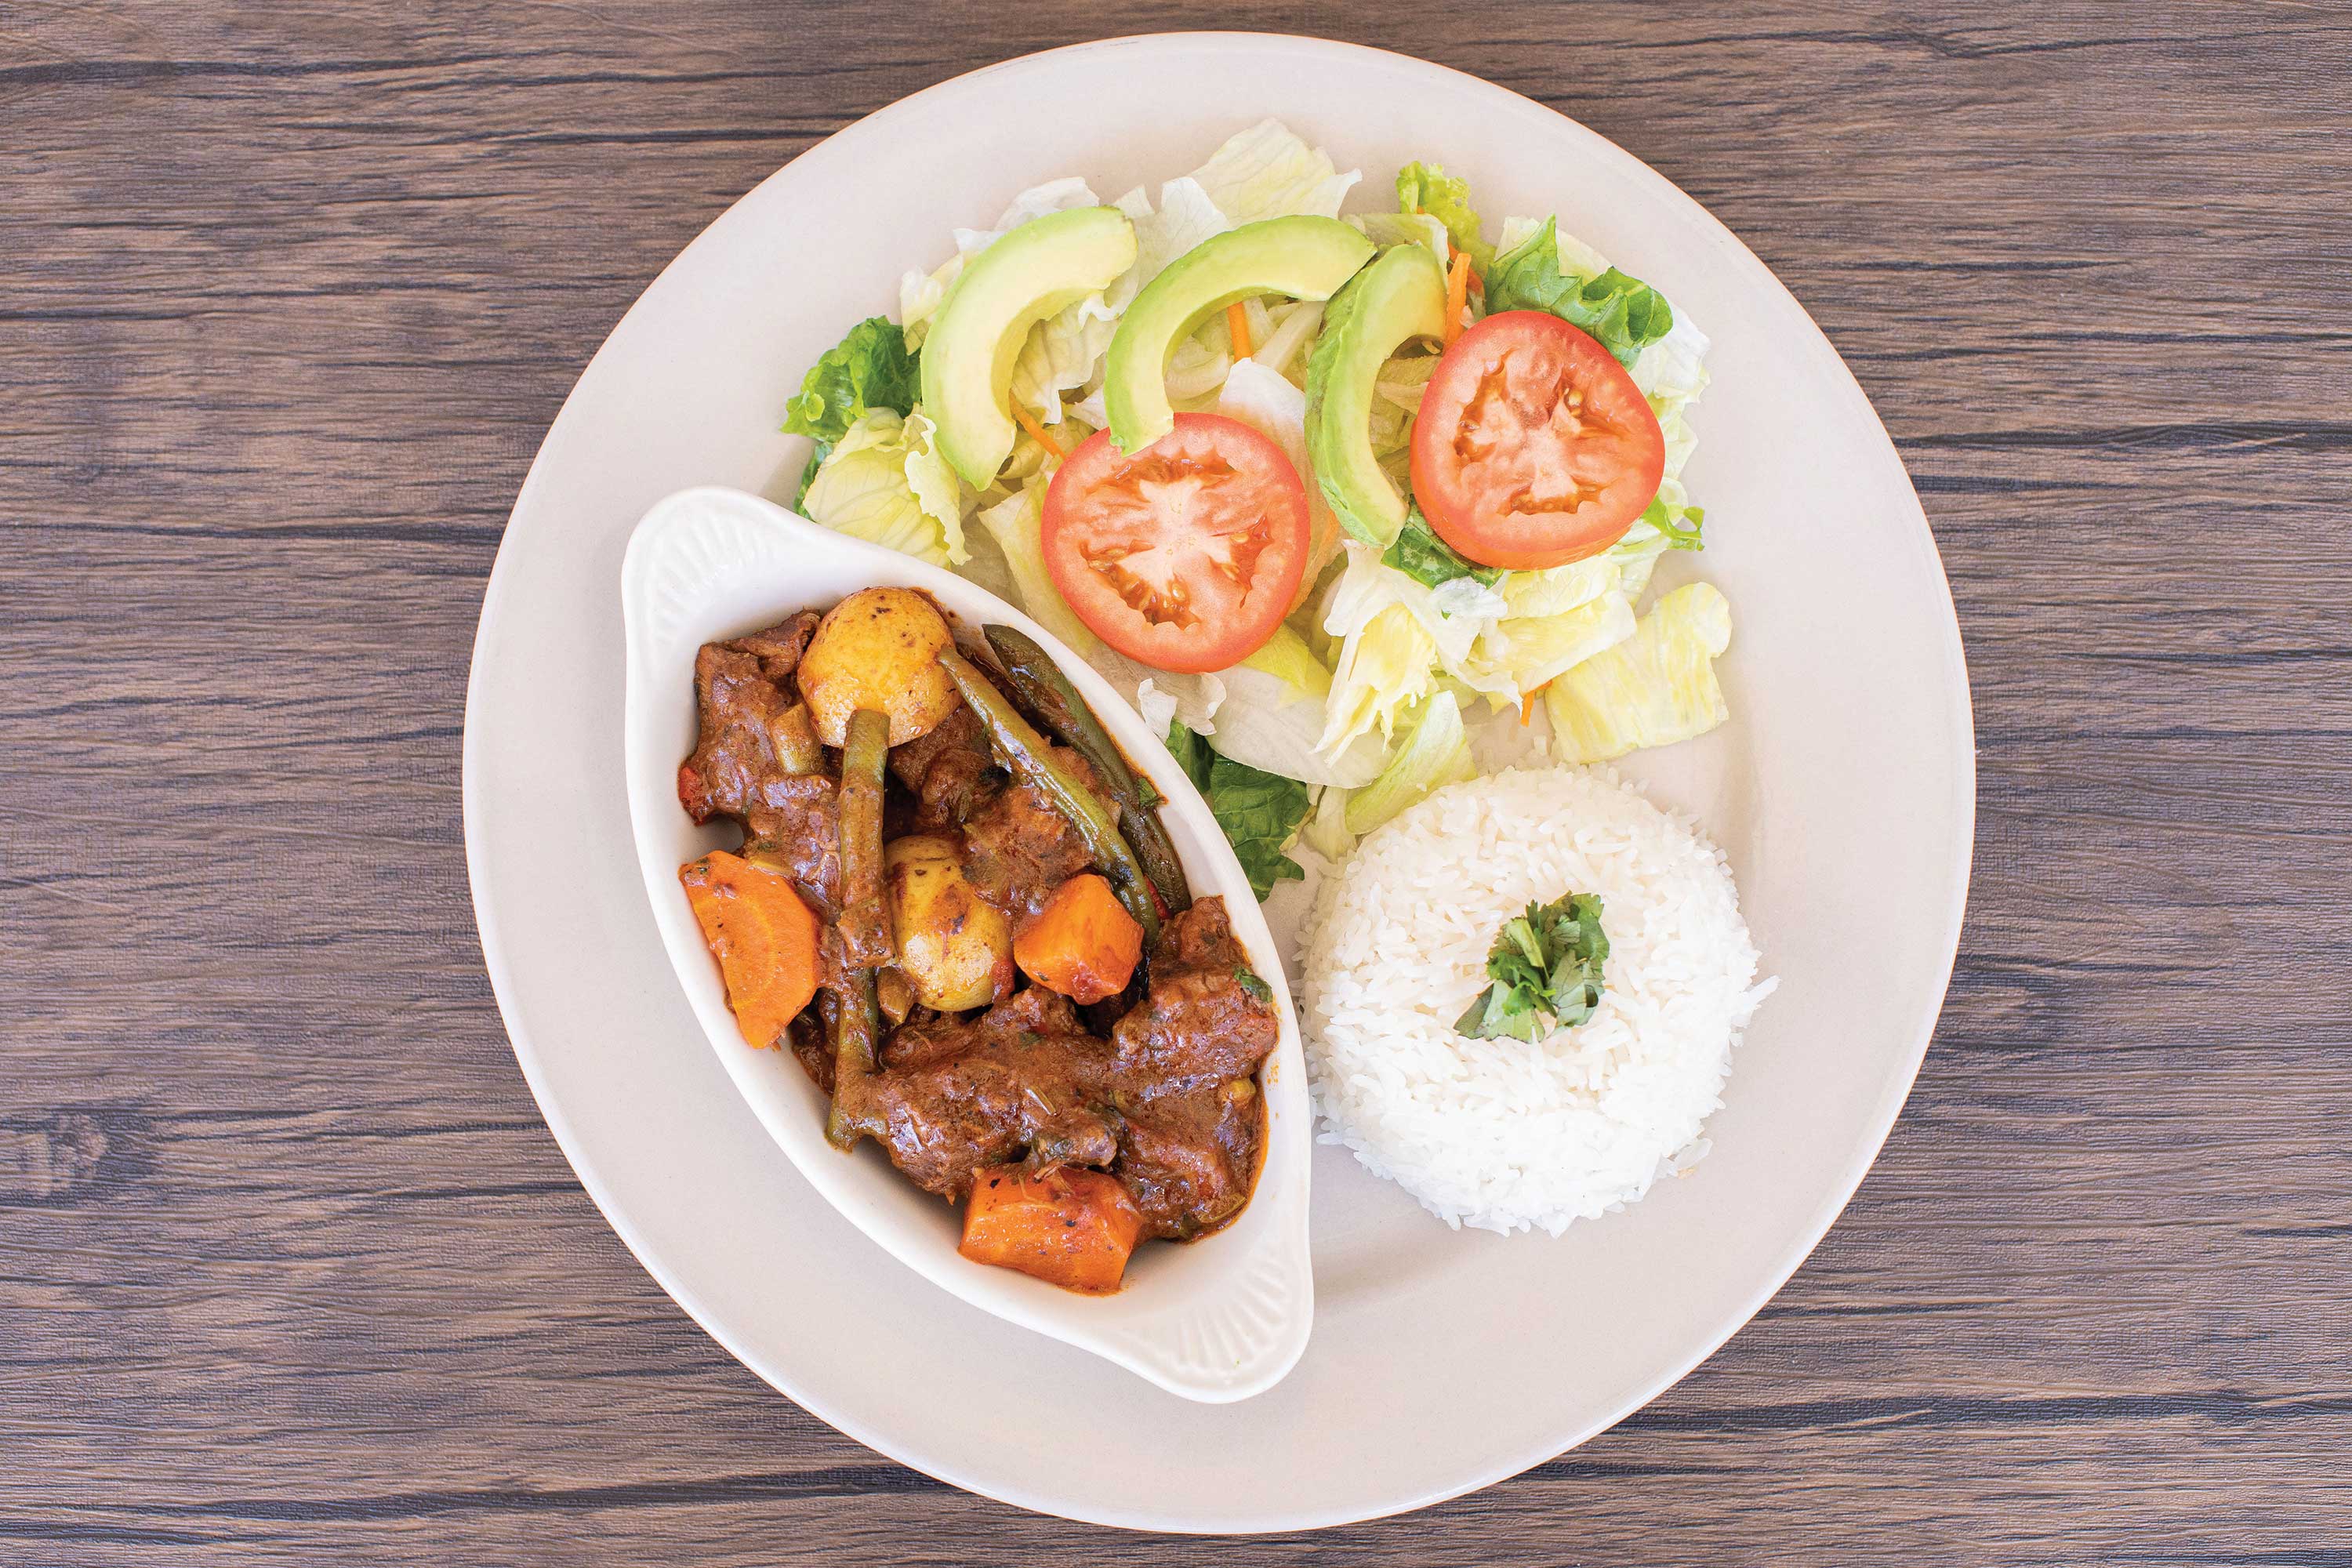 Image: Stewed beef with potato, greeen beans and carrots served in a white dish next to a lettuce and tomato salad and a mound of white rice.